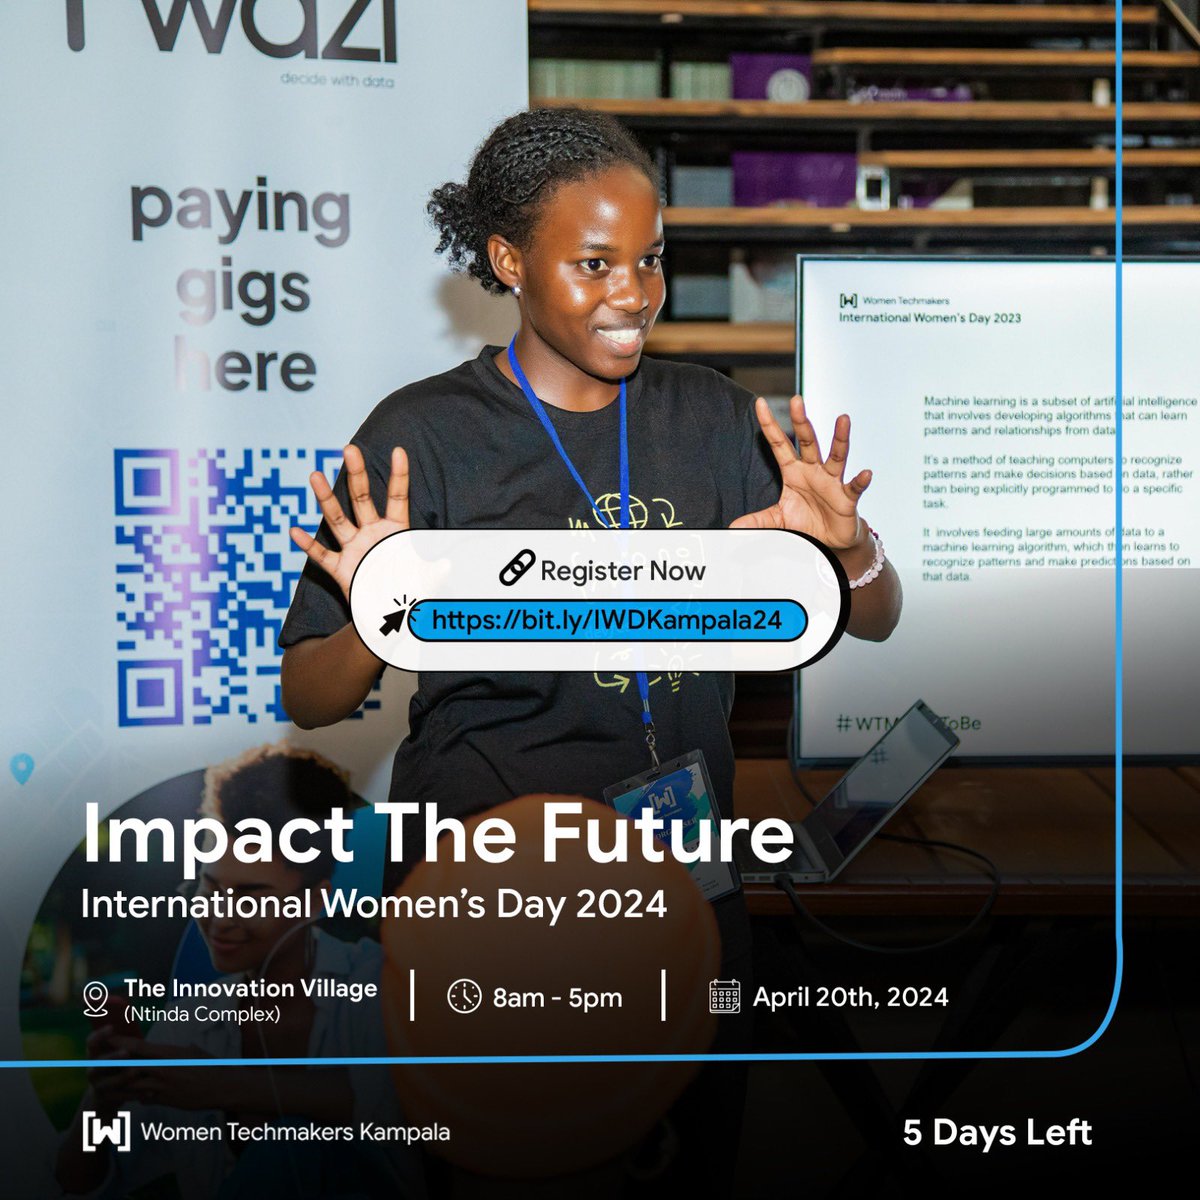 Join these incredible ladies doing amazing stuff in the Uganda tech space at IWD Kampala 2024 this Saturday, April 20, at @TheVillageUG - Ntinda. The day will feature stories, tech talks, hands-on sessions, & networking as we #ImpactTheFuture. Register: bit.ly/IWDKampala24